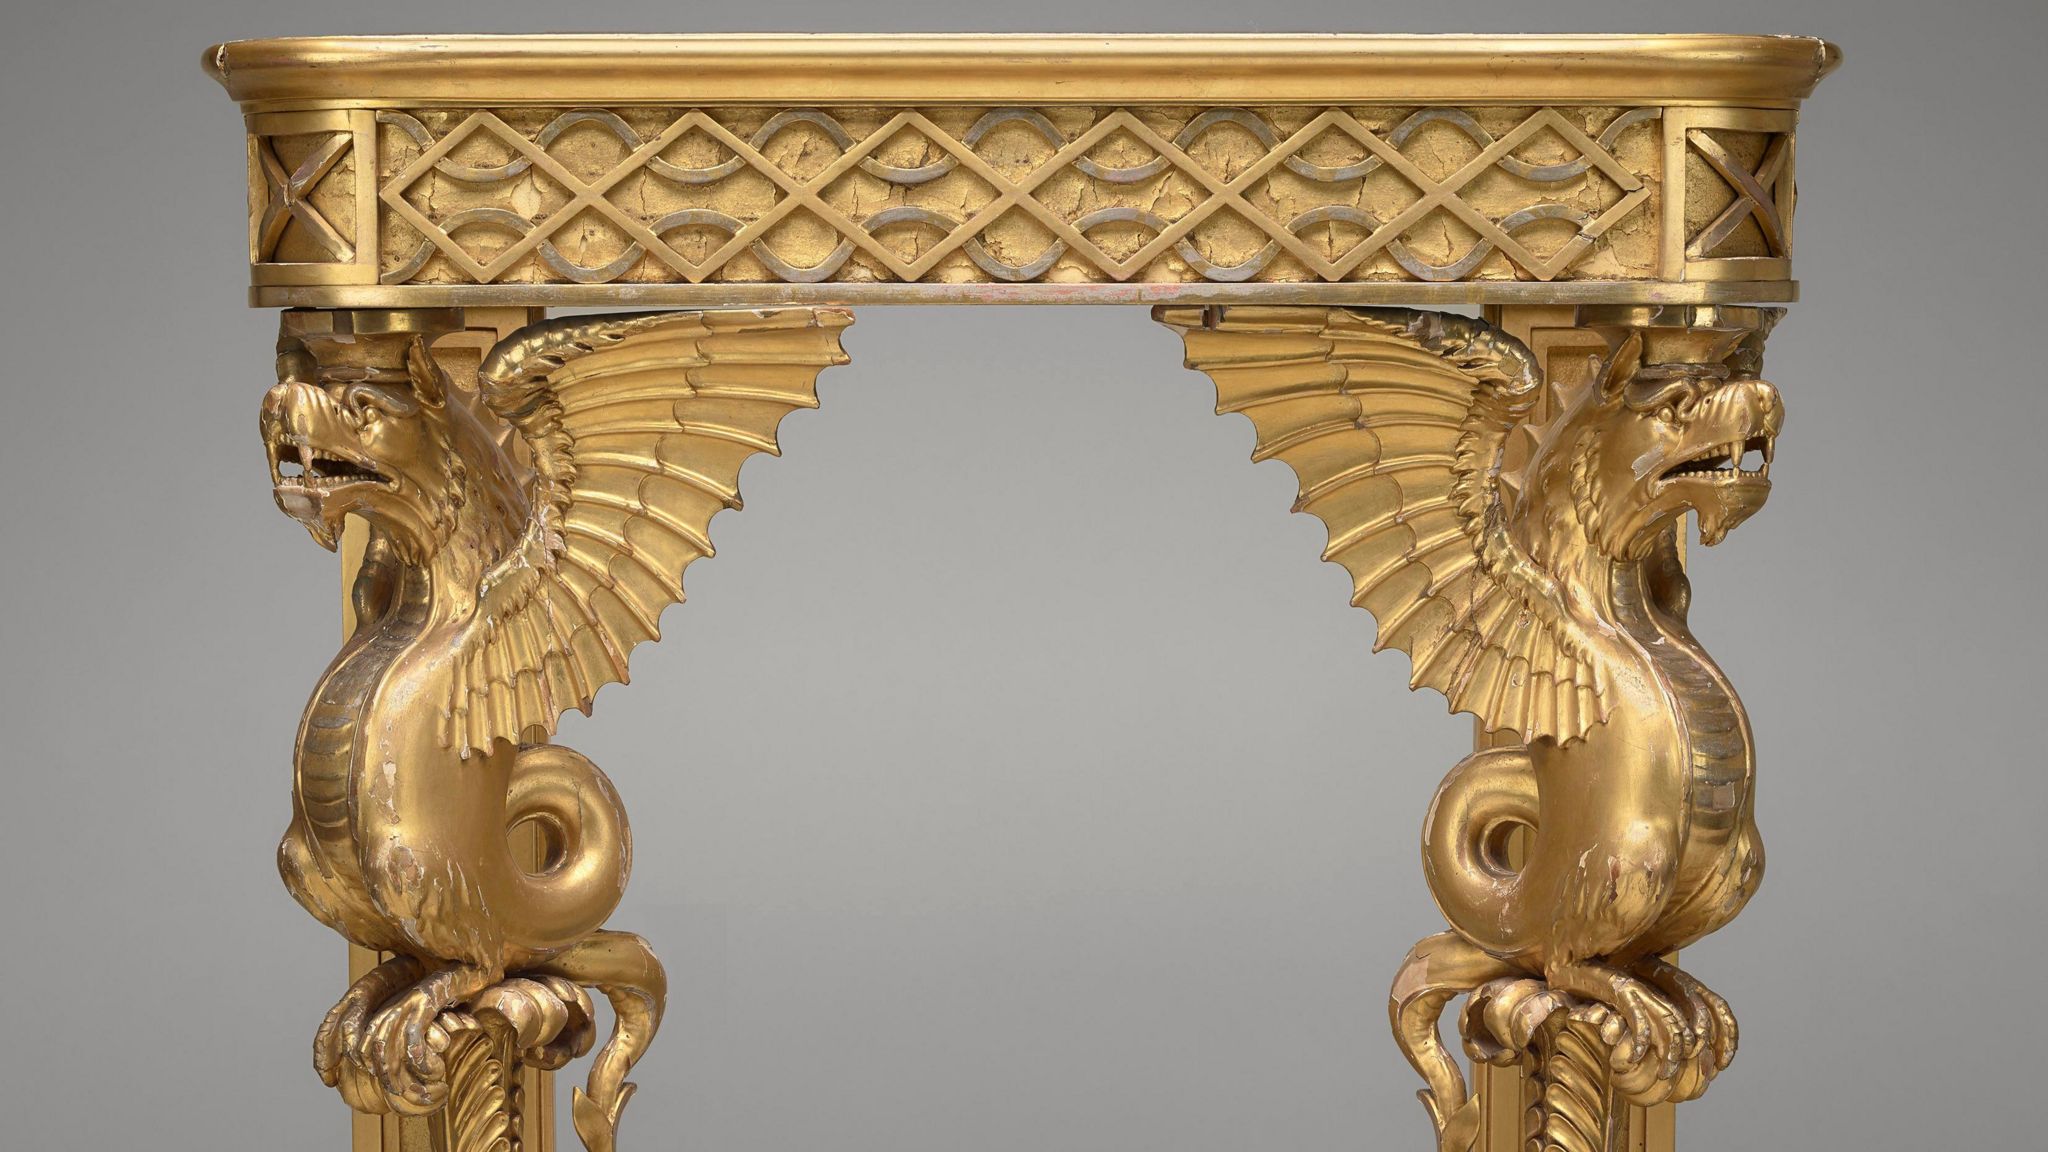 A gold Pier table made in 1811